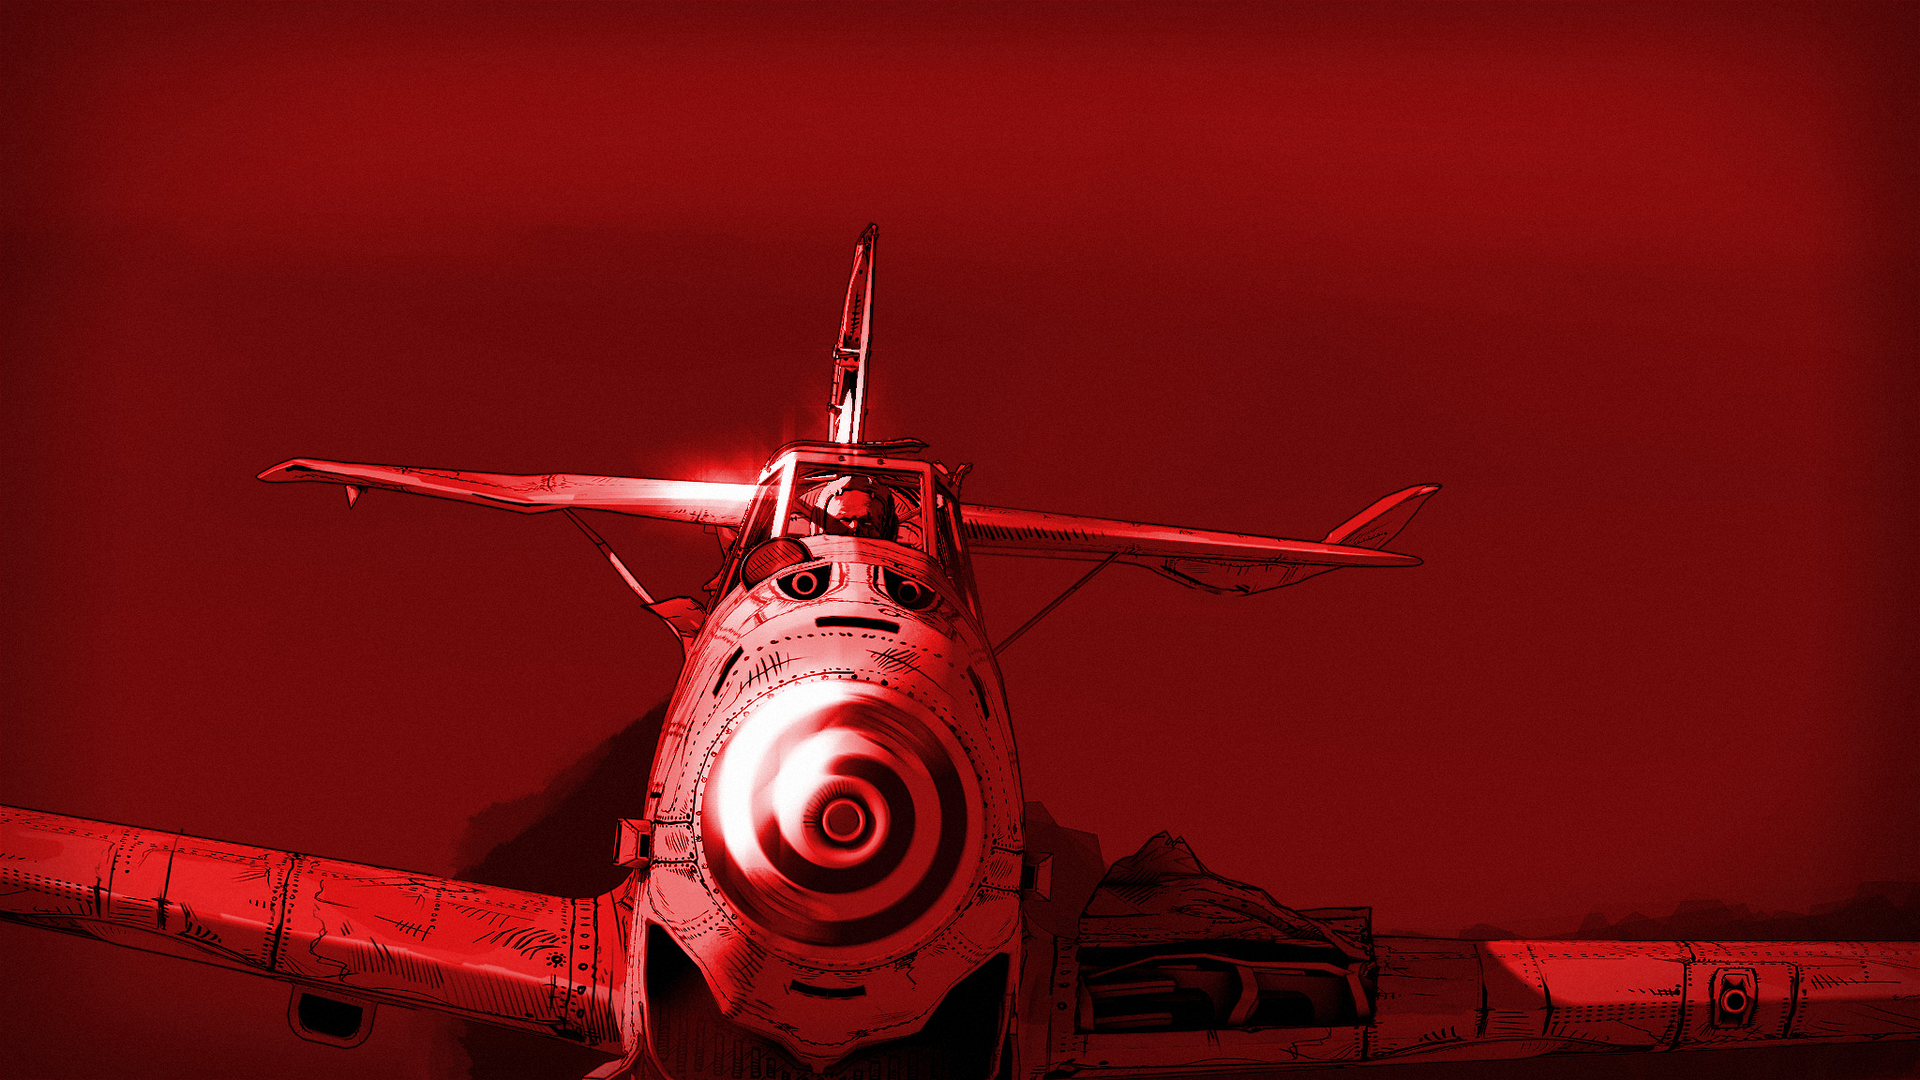 General 1920x1080 airplane Paths of Hate digital art Messerschmitt Bf 109 red background aircraft military aircraft military military vehicle vehicle movies red